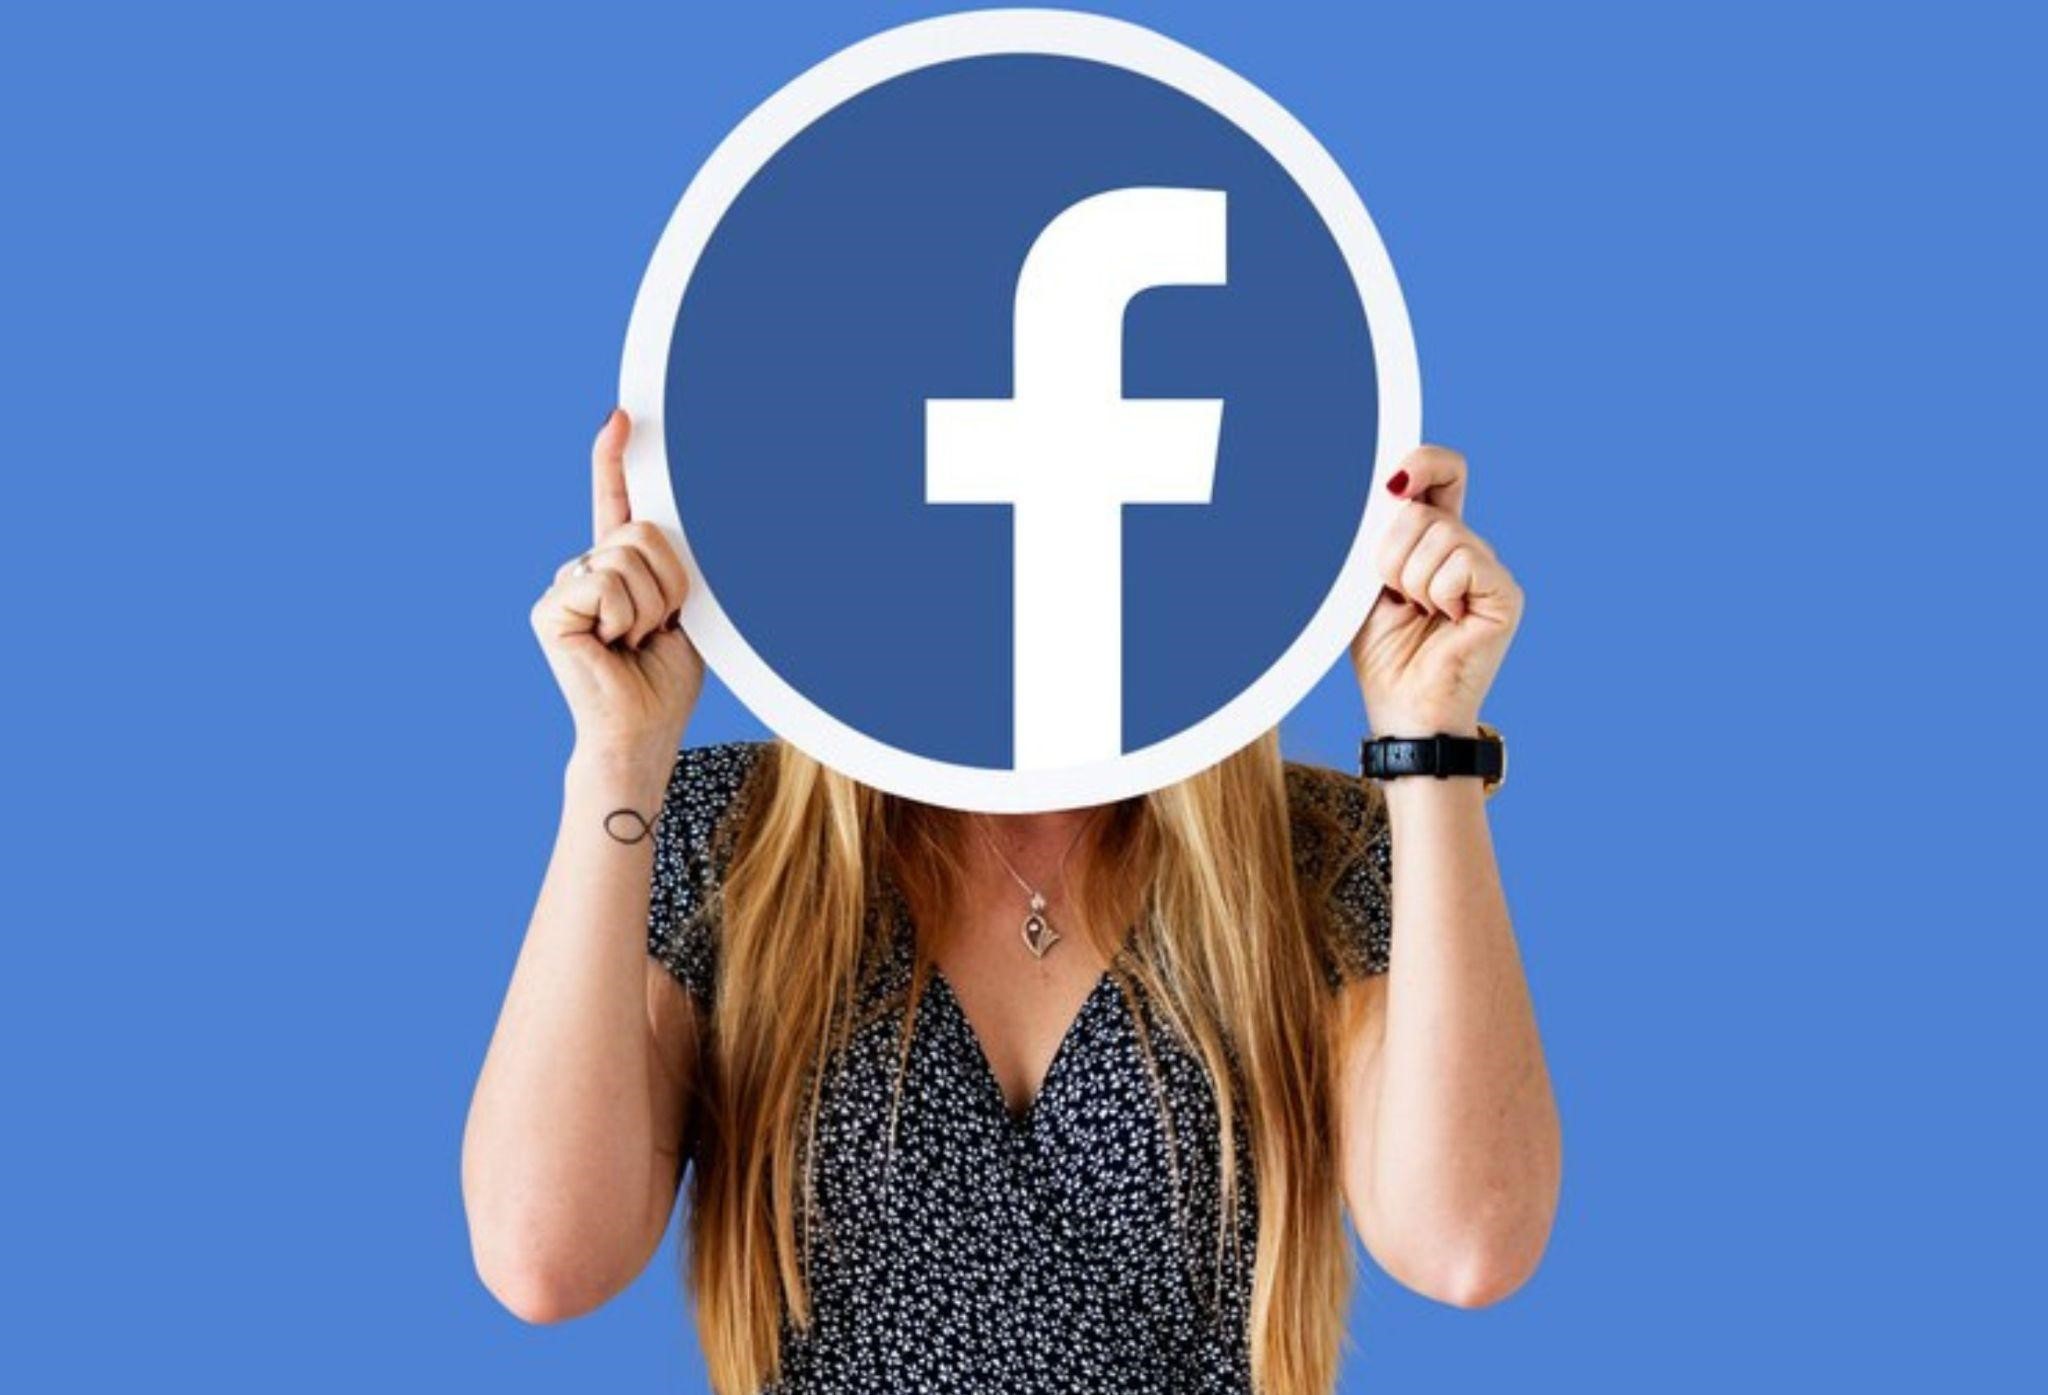 change facebook profile picture without notifying everyone